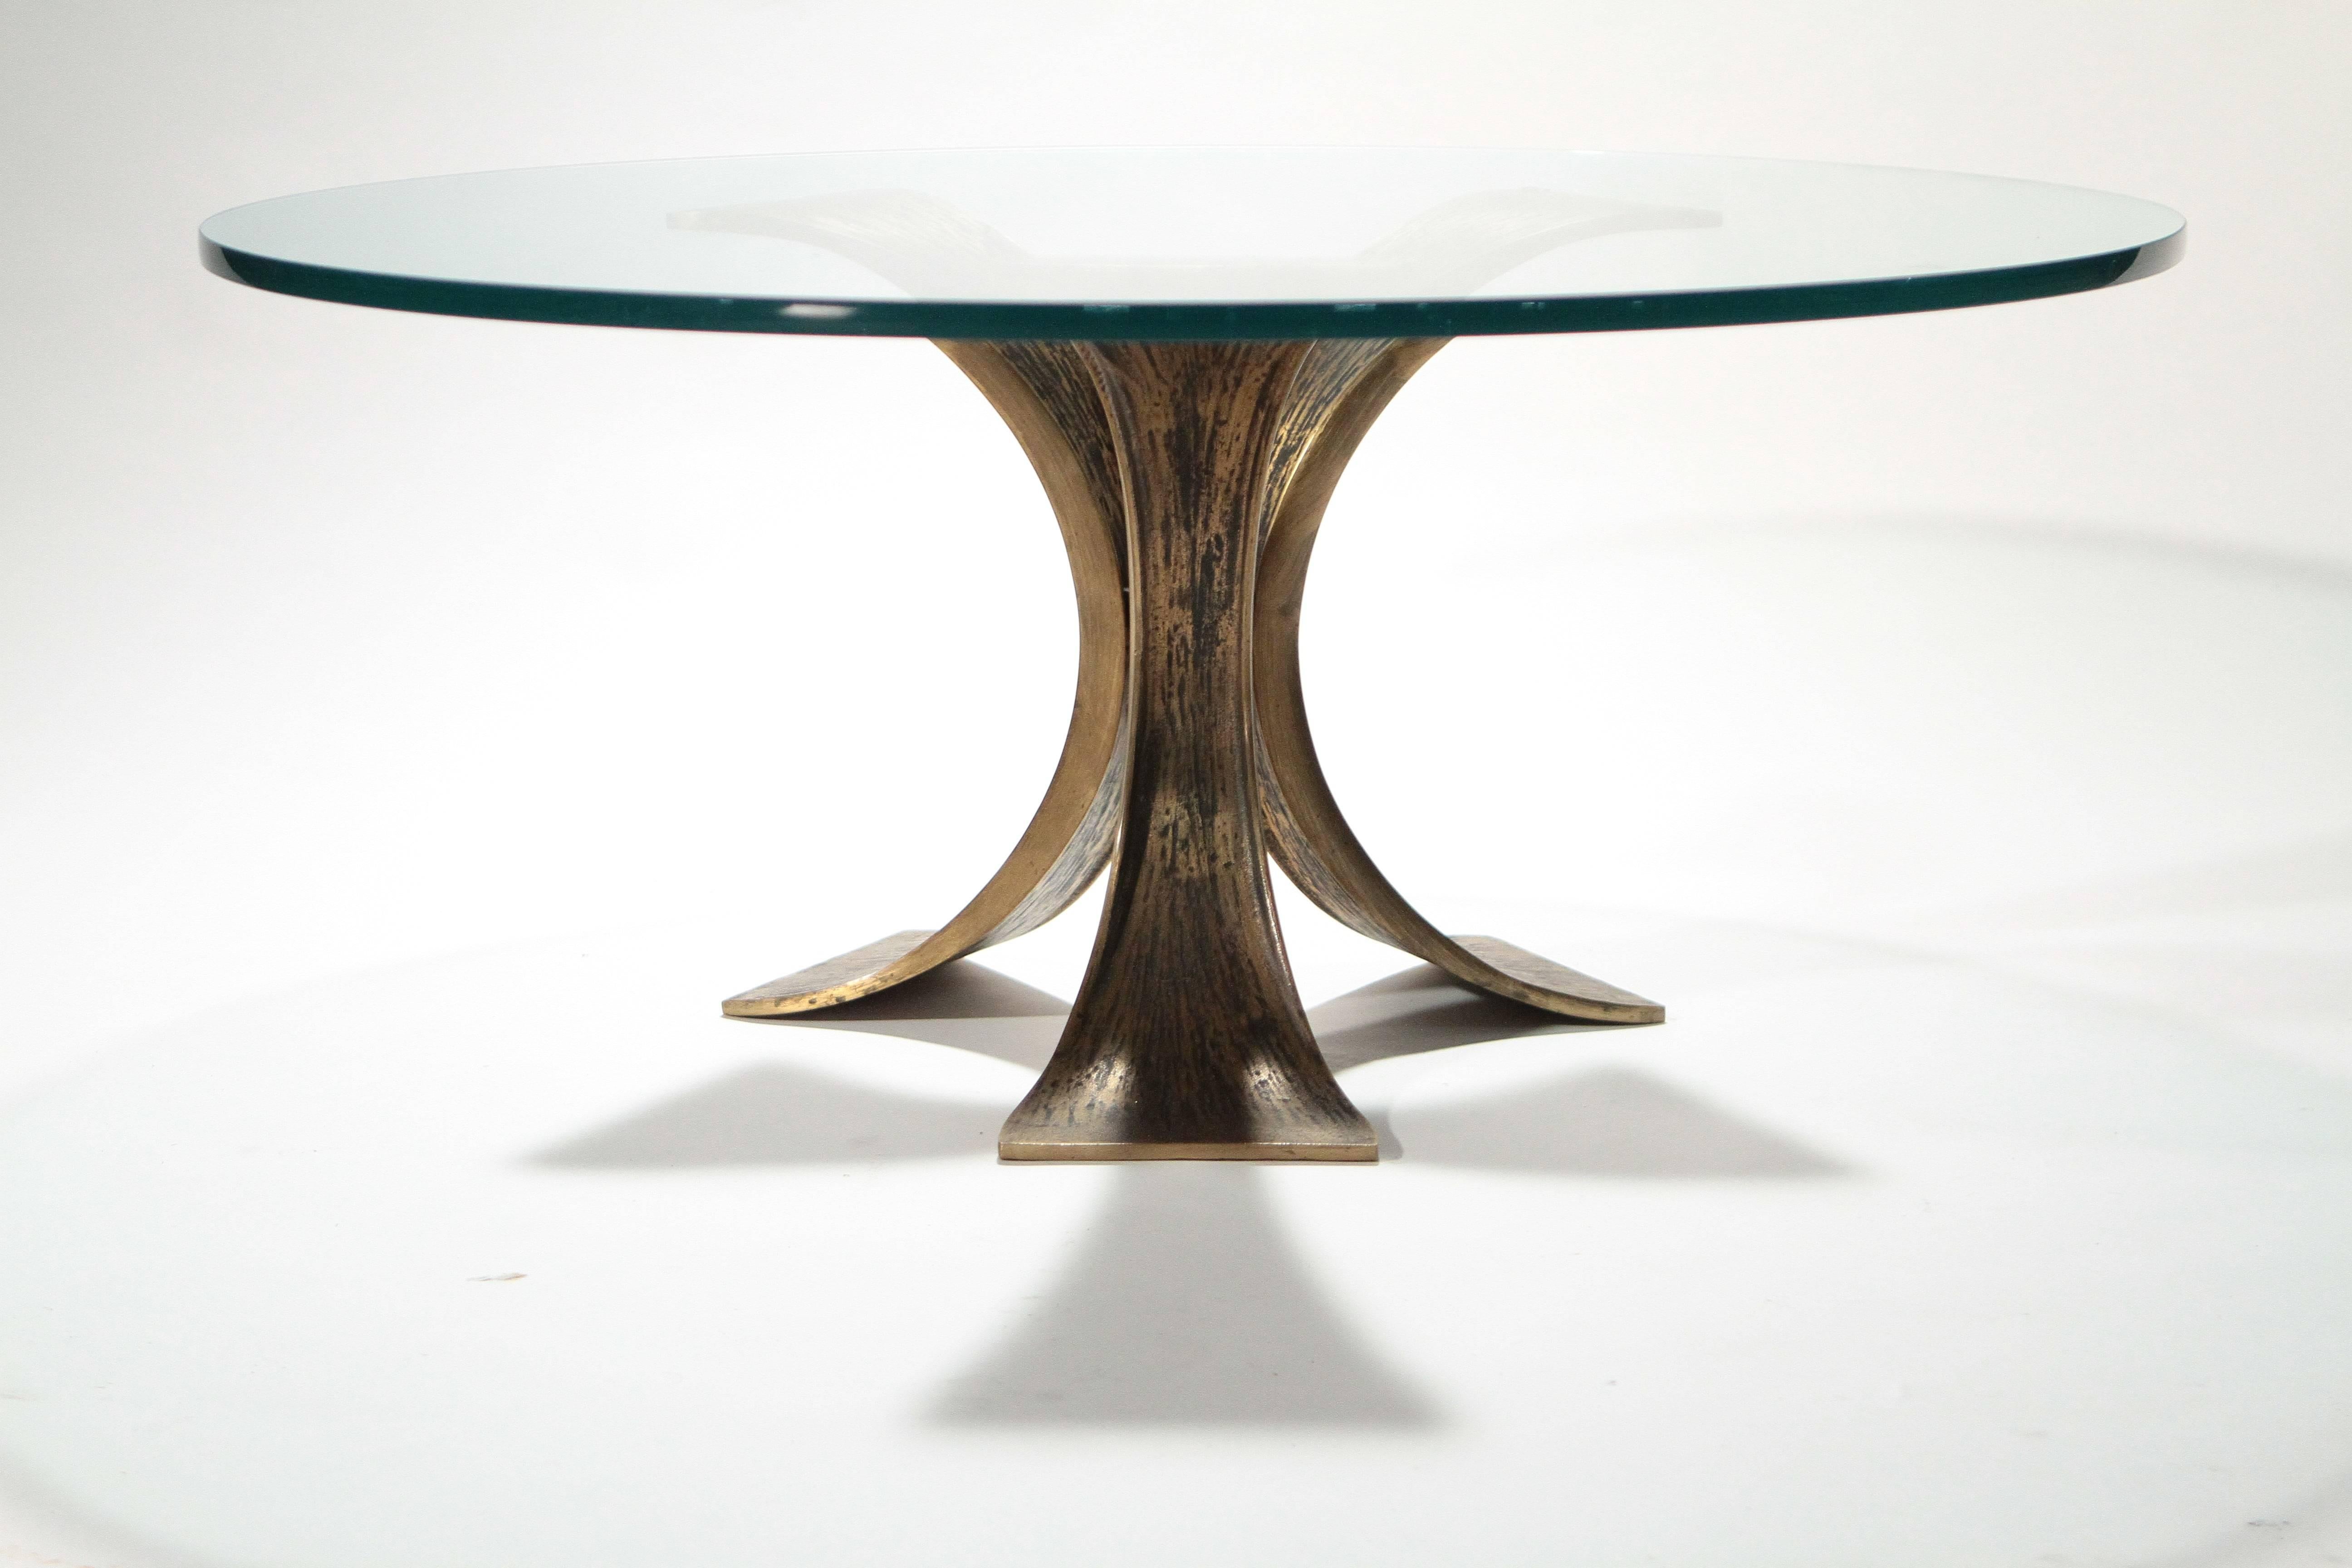 The natural shapes featured in this coffee table lend a solid, but wild feel to the piece. Heavy bronze feet are shaped and textured in a way that recalls the untamed beauty found in windswept wood or tree bark such ‘unrefined’ touches are